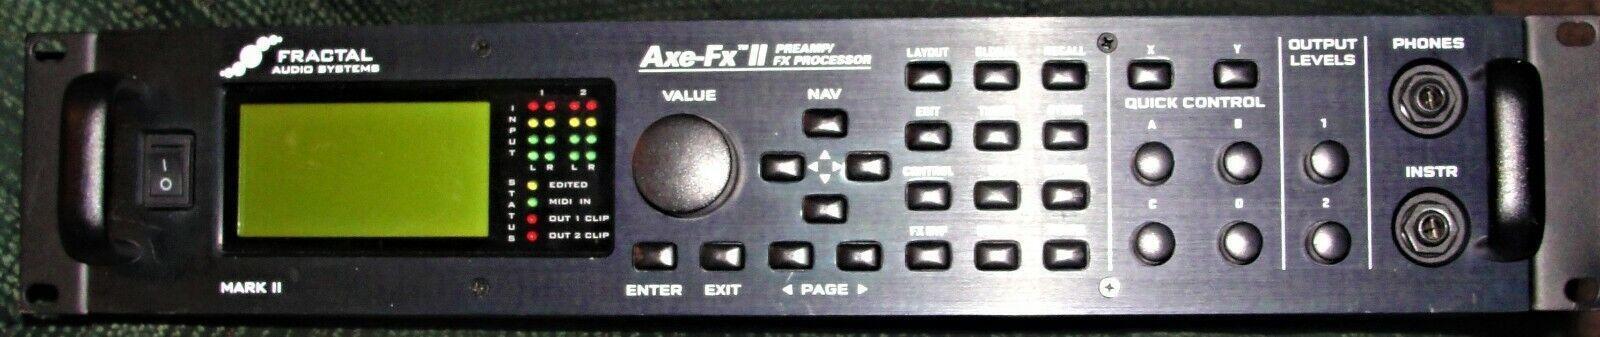 Used FRACTIAL AUDIO Fractal Audio Axe FX II - Sweetwater's Gear